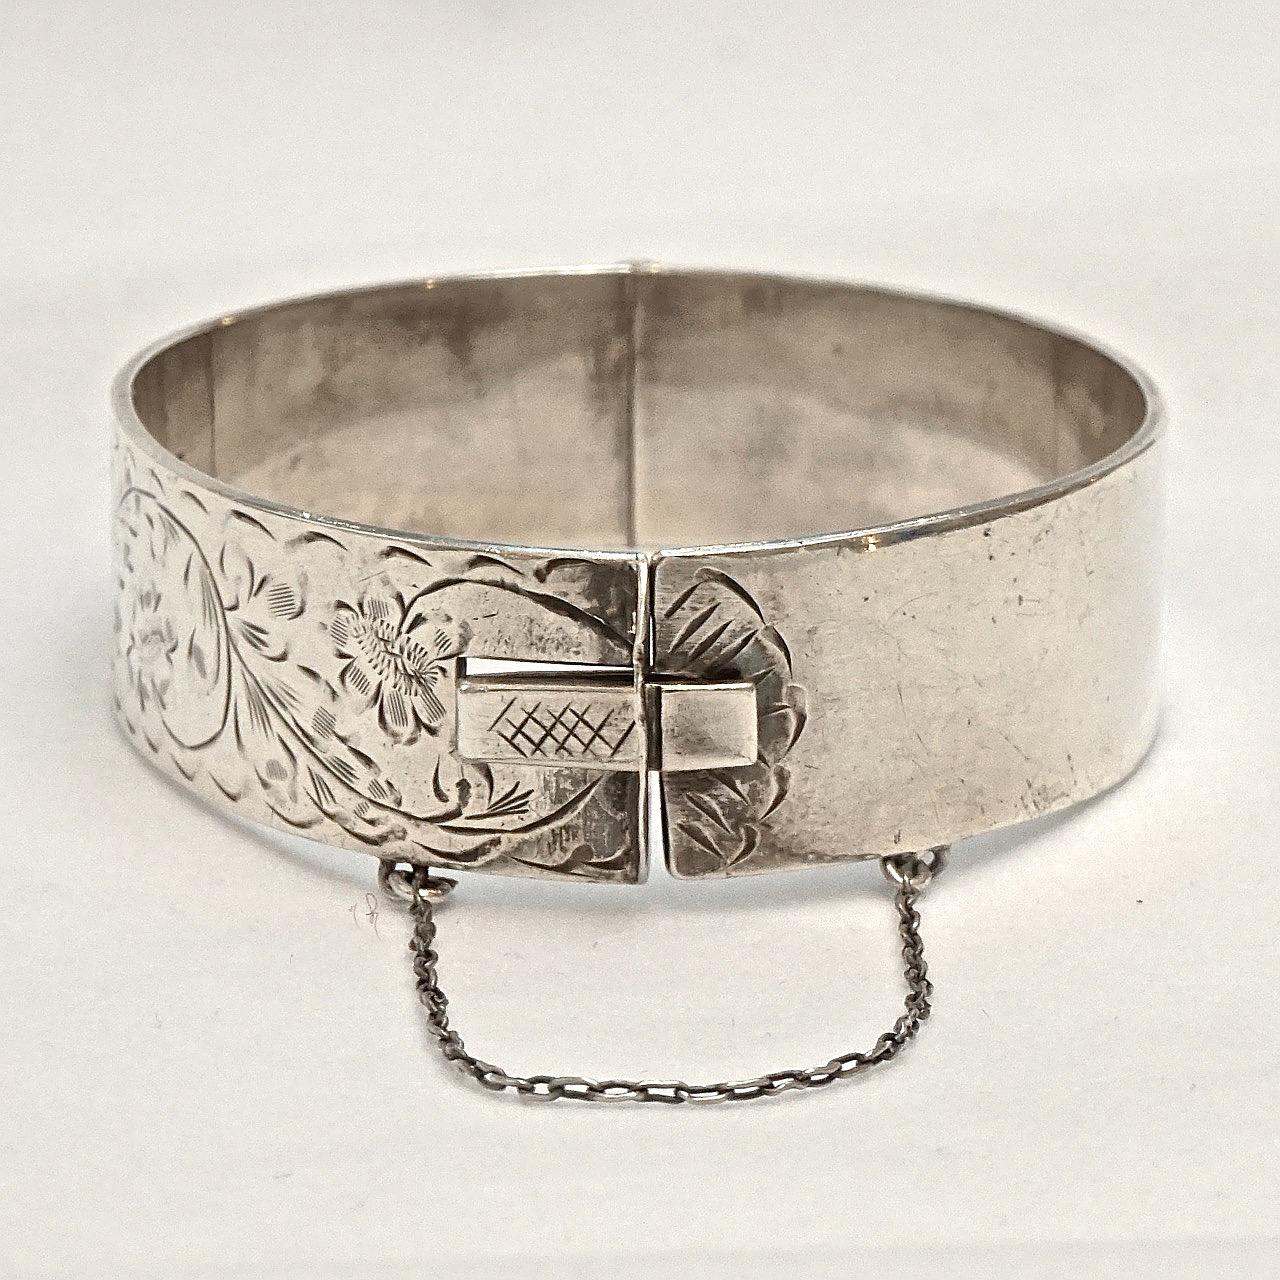 English Sterling Silver Engraved Flowers and Leaves Bangle Bracelet 1960s In Good Condition For Sale In London, GB